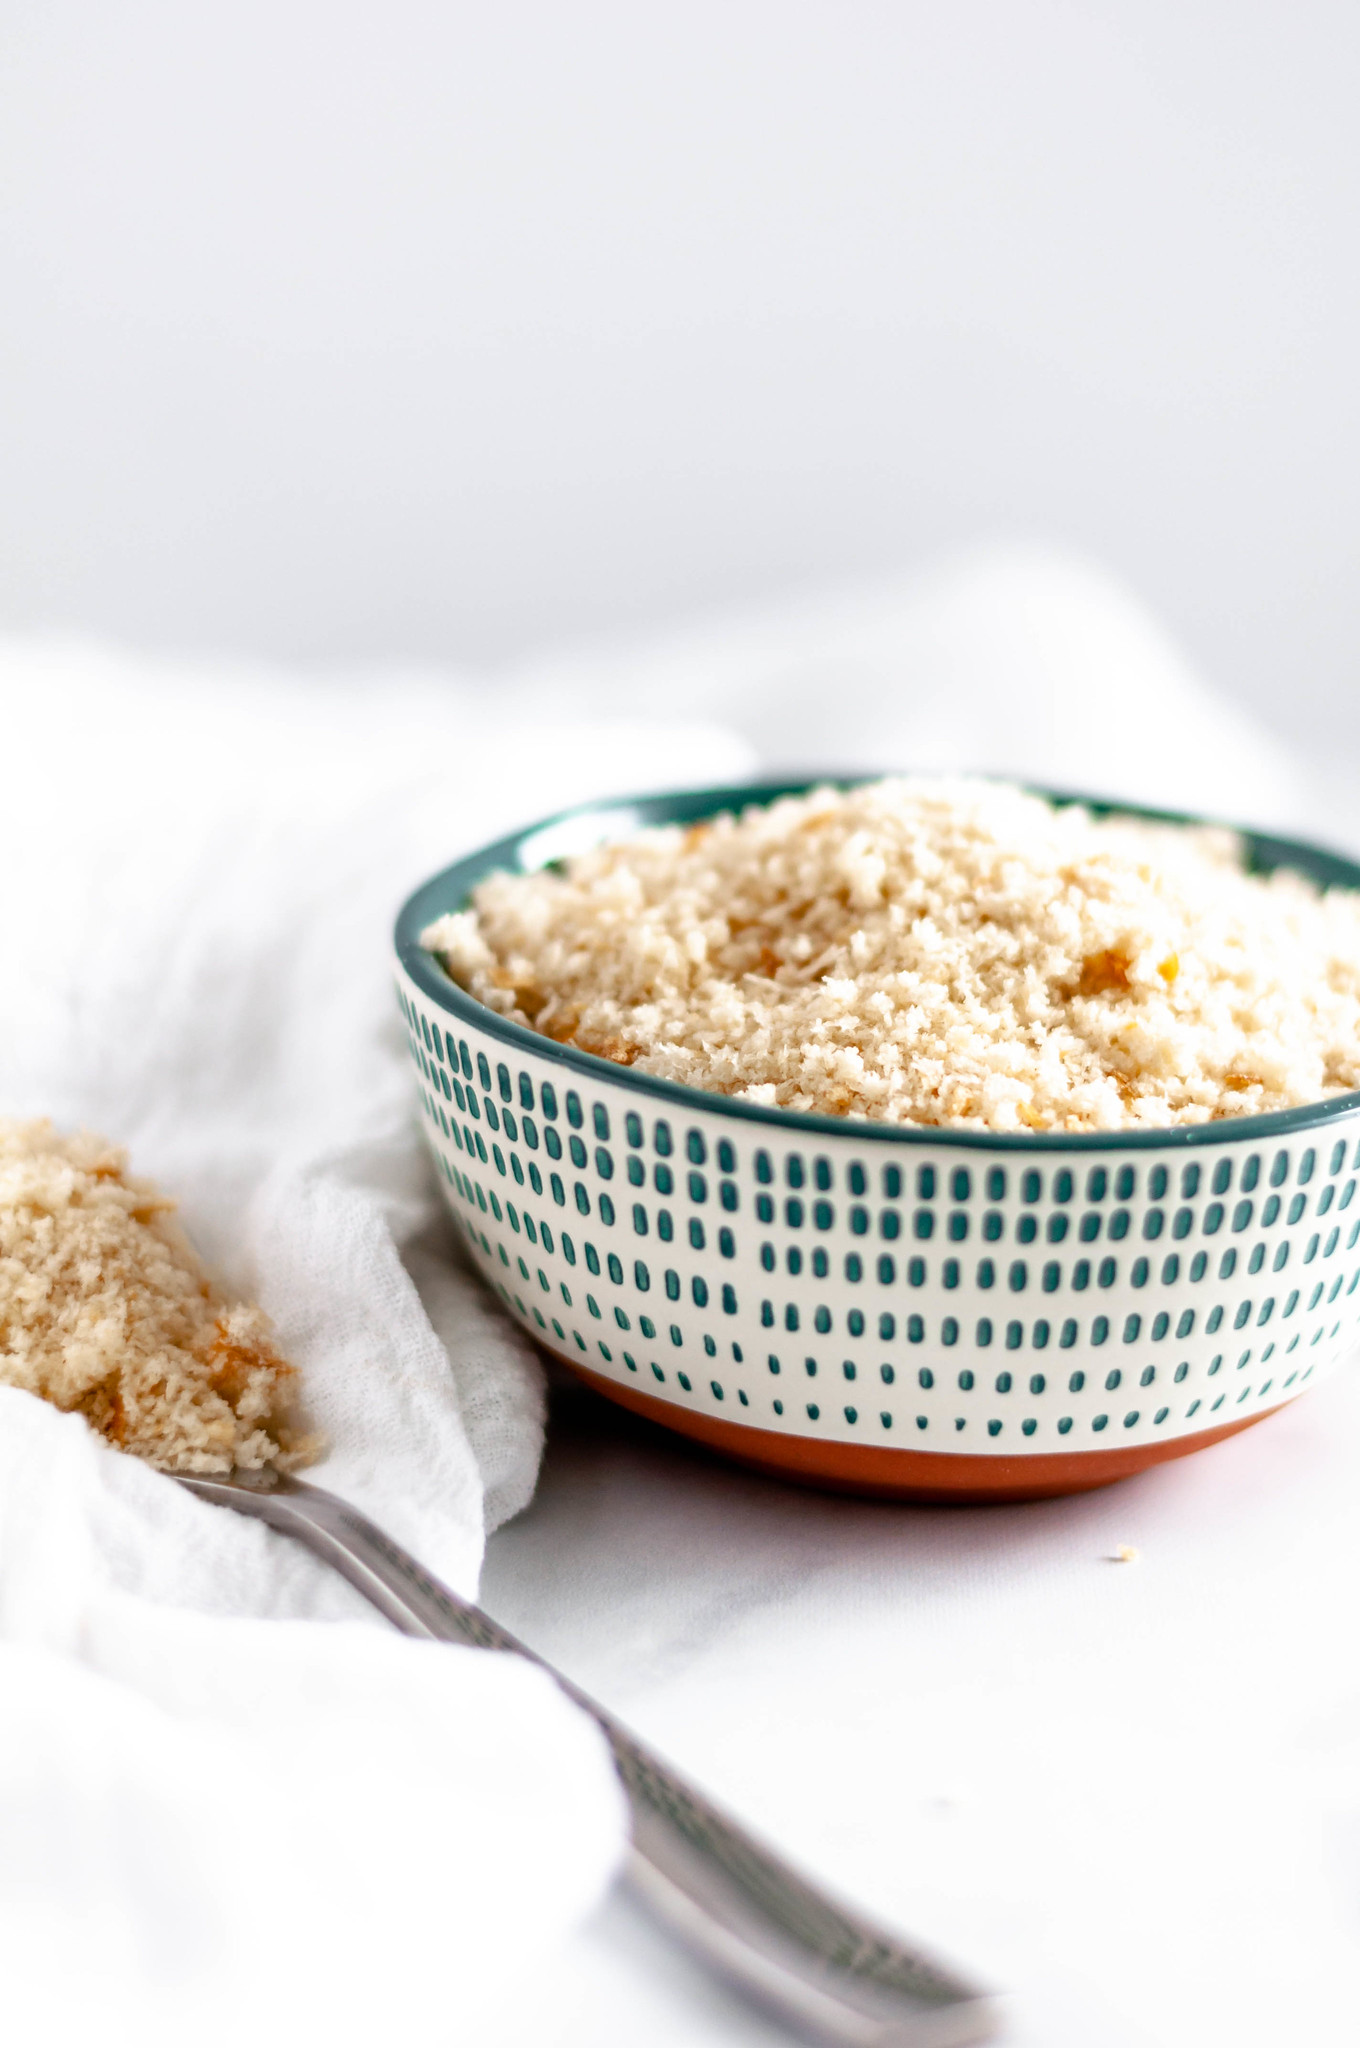 Don't throw away that stale bread in your cabinet. Instead, use it to make Homemade Bread Crumbs. They are super simple to make and can be used in all your favorite recipes.